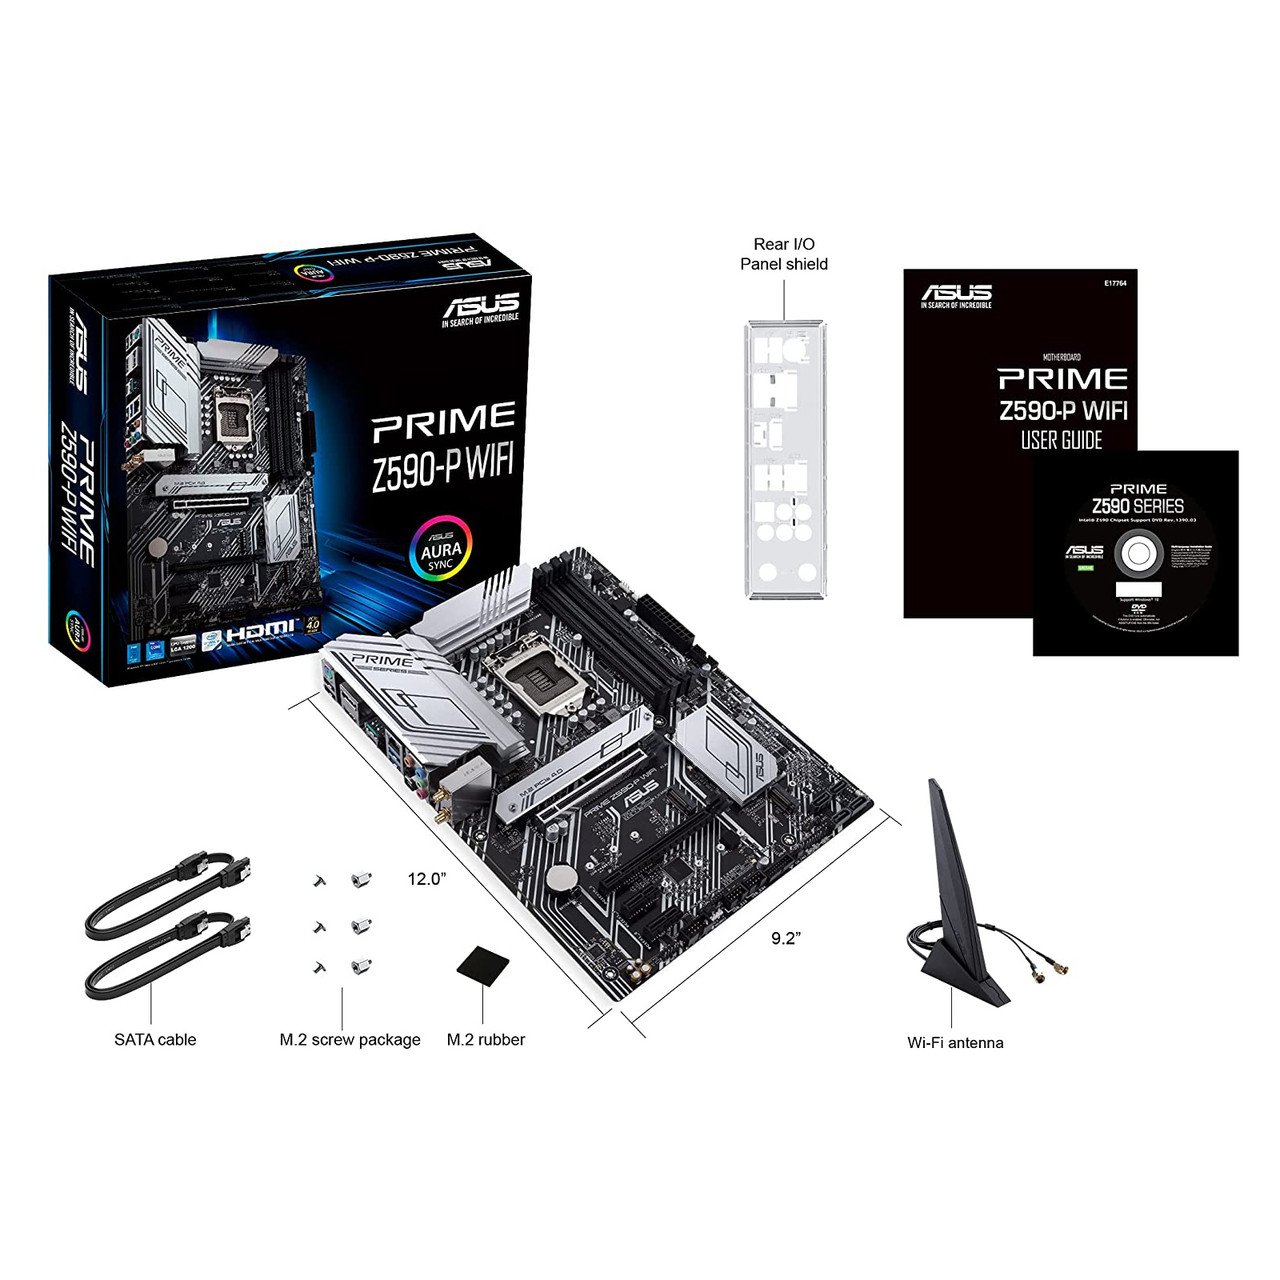 ASUS Prime Z590-P WiFi LGA 1200 (Intel 11th/10th Gen) ATX Motherboard (PCIe 4.0, 10+1 Power Stages 3X M.2 WiFi 6, 2.5Gb LAN, Front Panel USB 3.2 Gen 2 USB Type-C, Thunderbolt 4 Support Aura Sync RGB)